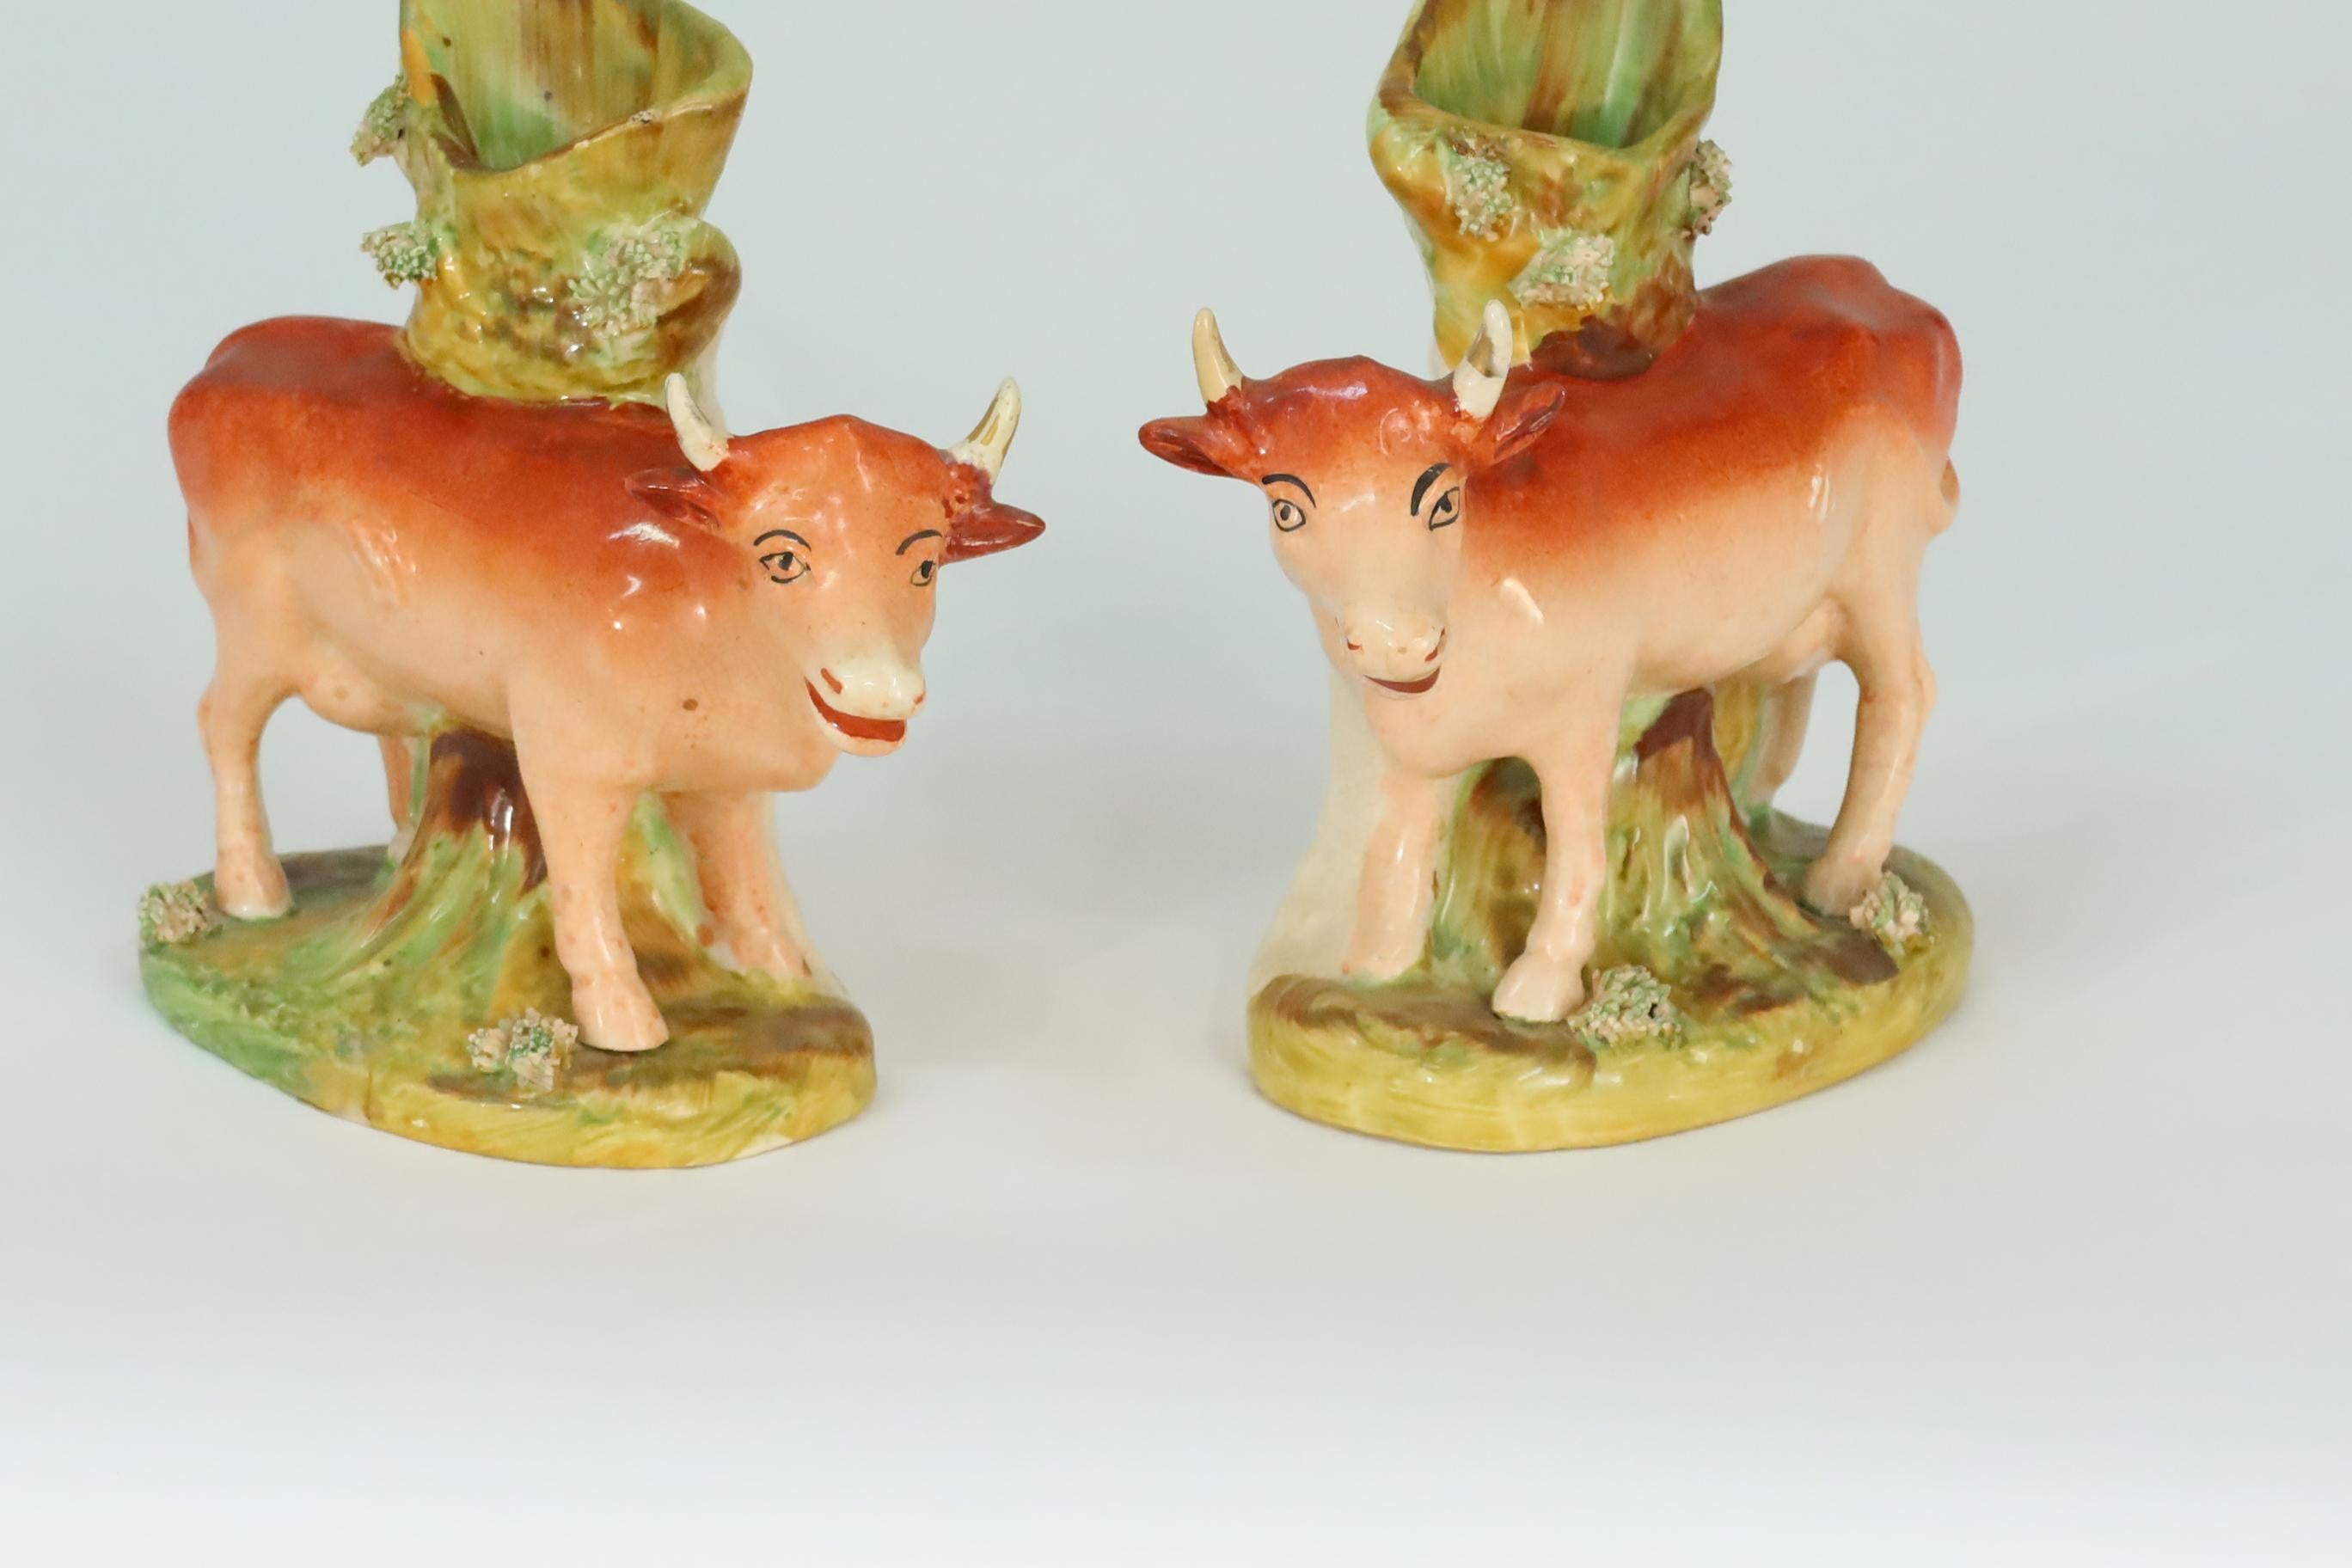 A fine pair of antique English Staffordshire cow spill vases with strong coloration and very good condition. Some gilt decoration is applied to the horns, circa 1840 (From the owner's private collection).